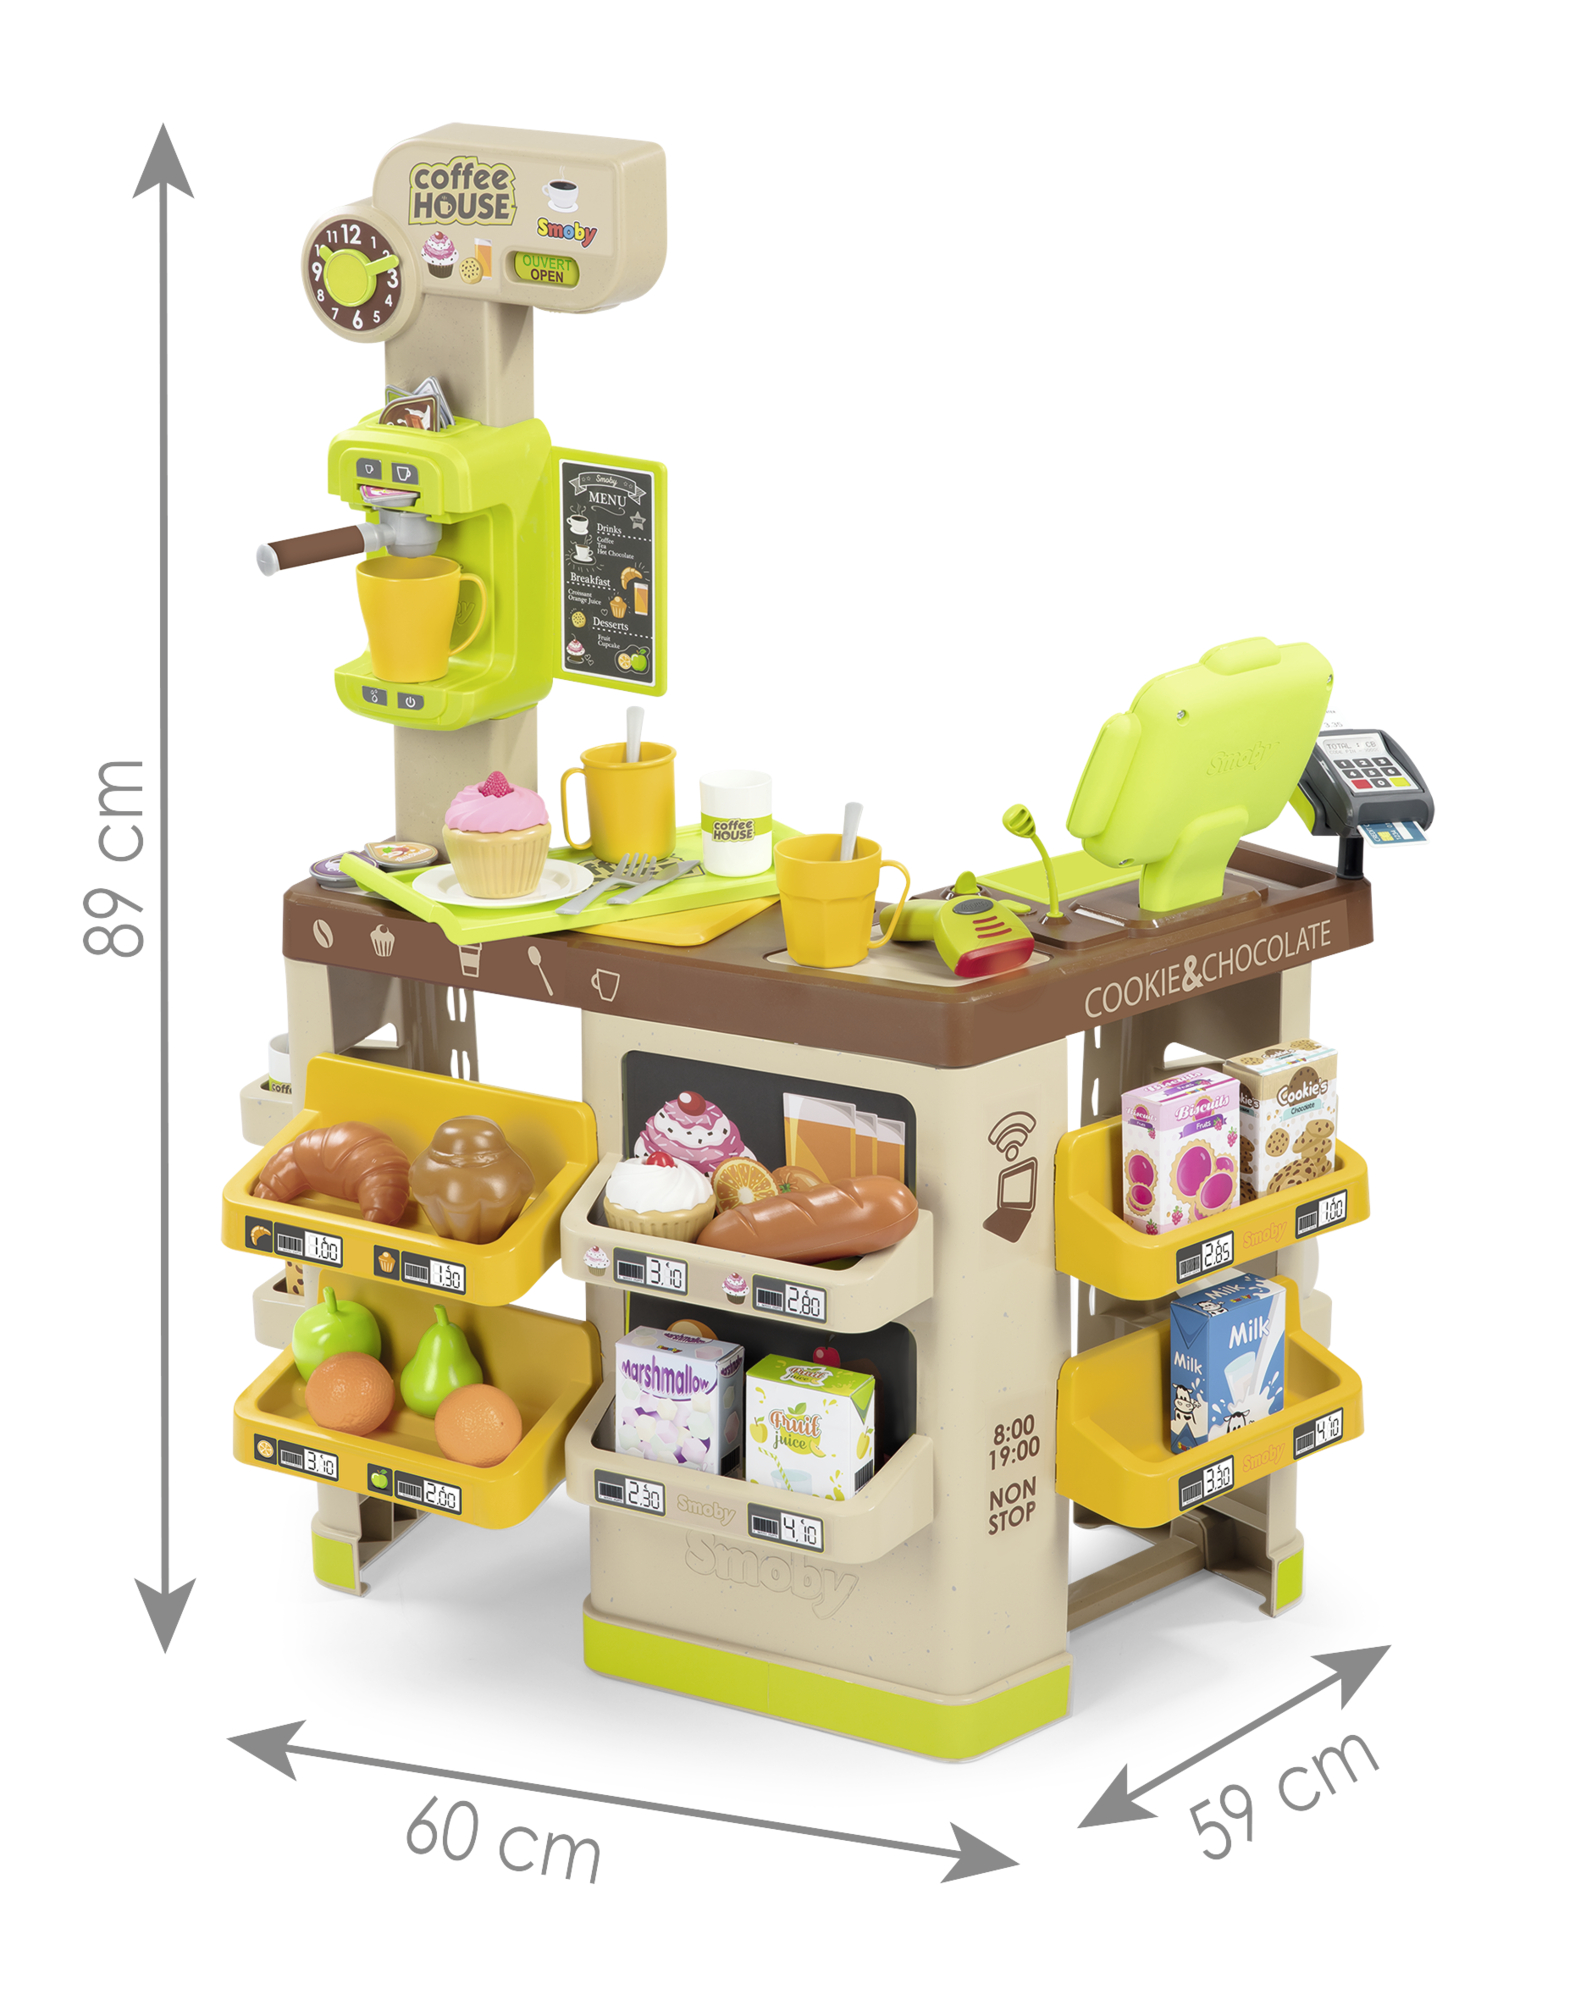 SMOBY Mehrfarbig House Spielset Coffee